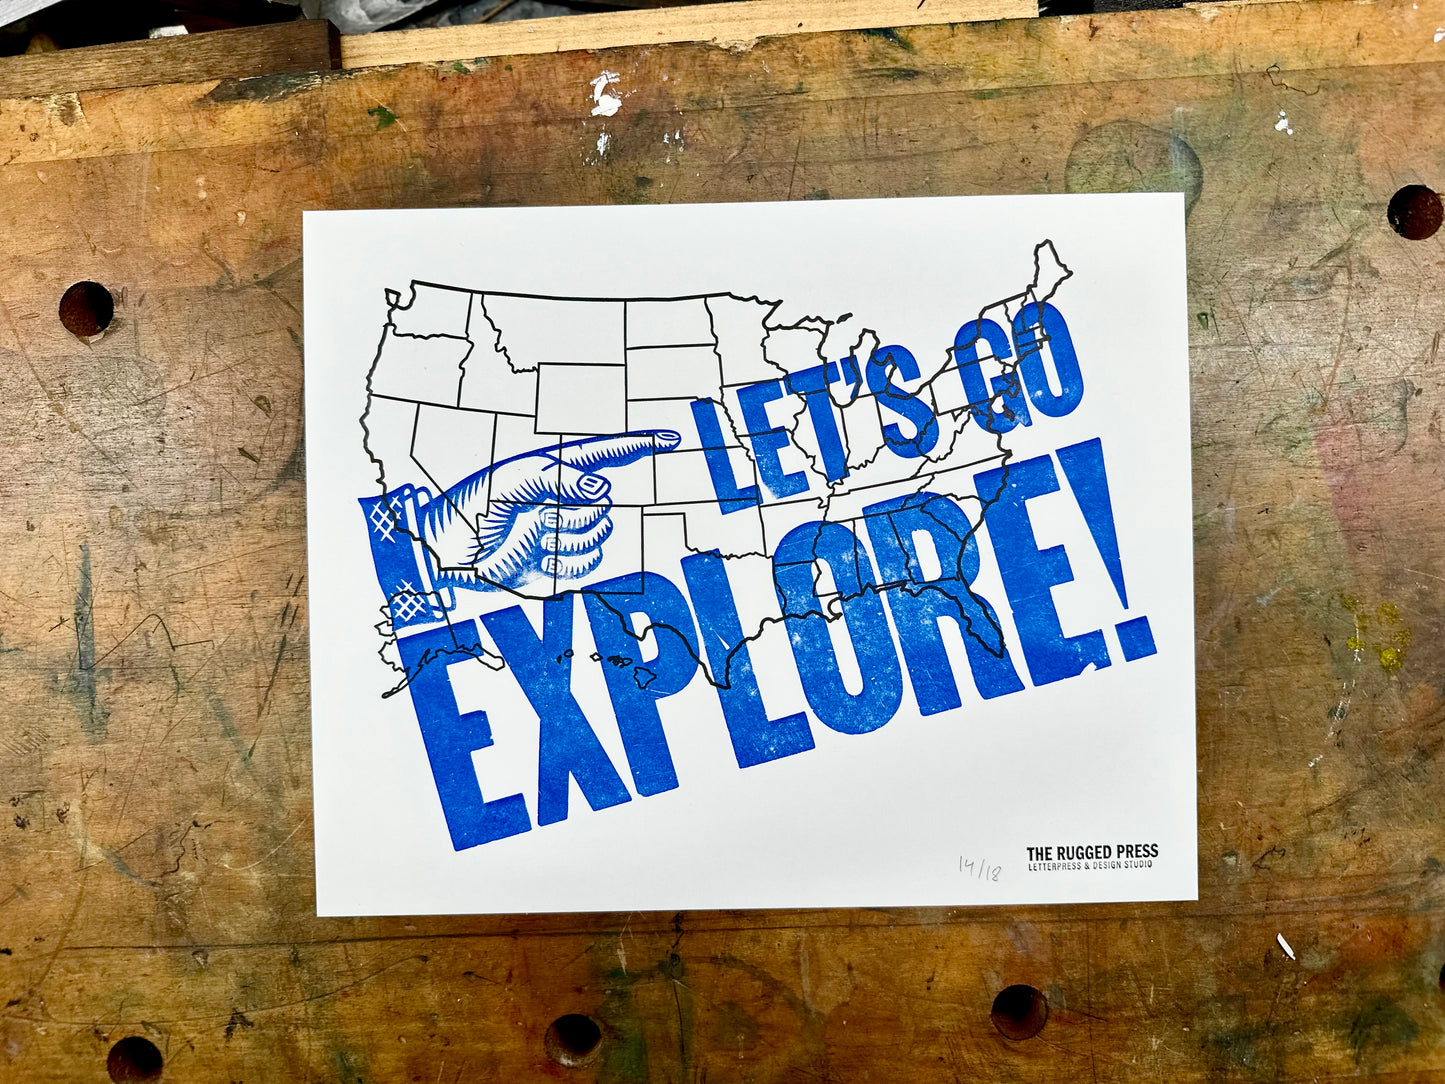 Let's Go Explore! Pin map